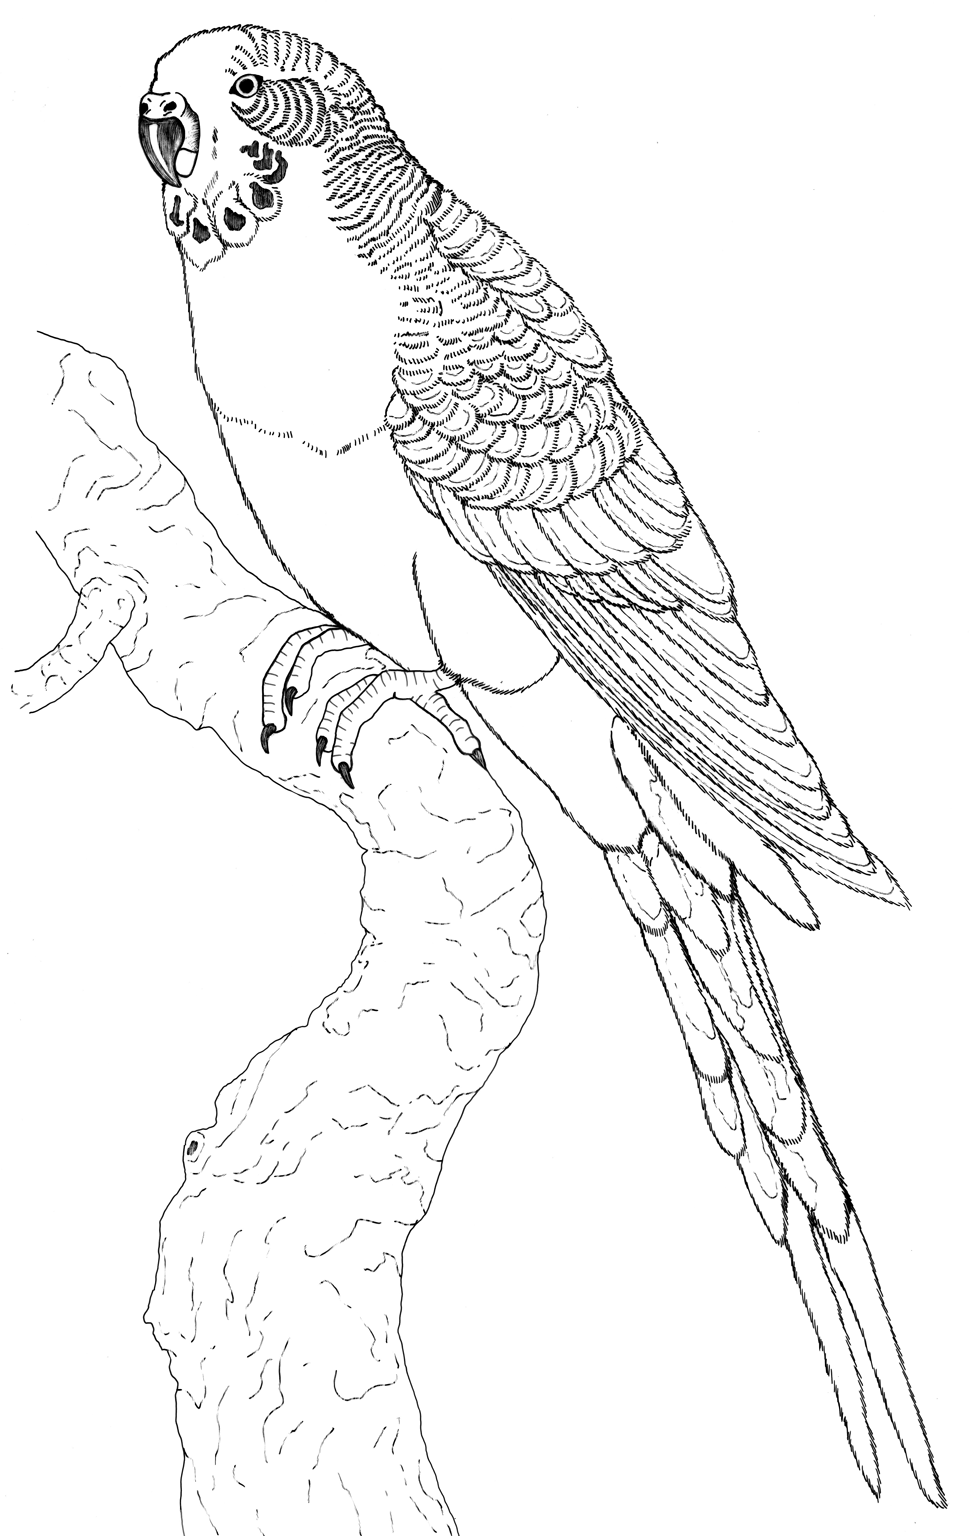 Papagei Bilder Zum Ausmalen Bird Coloring Pages Coloring Pages Nature Bird Drawings